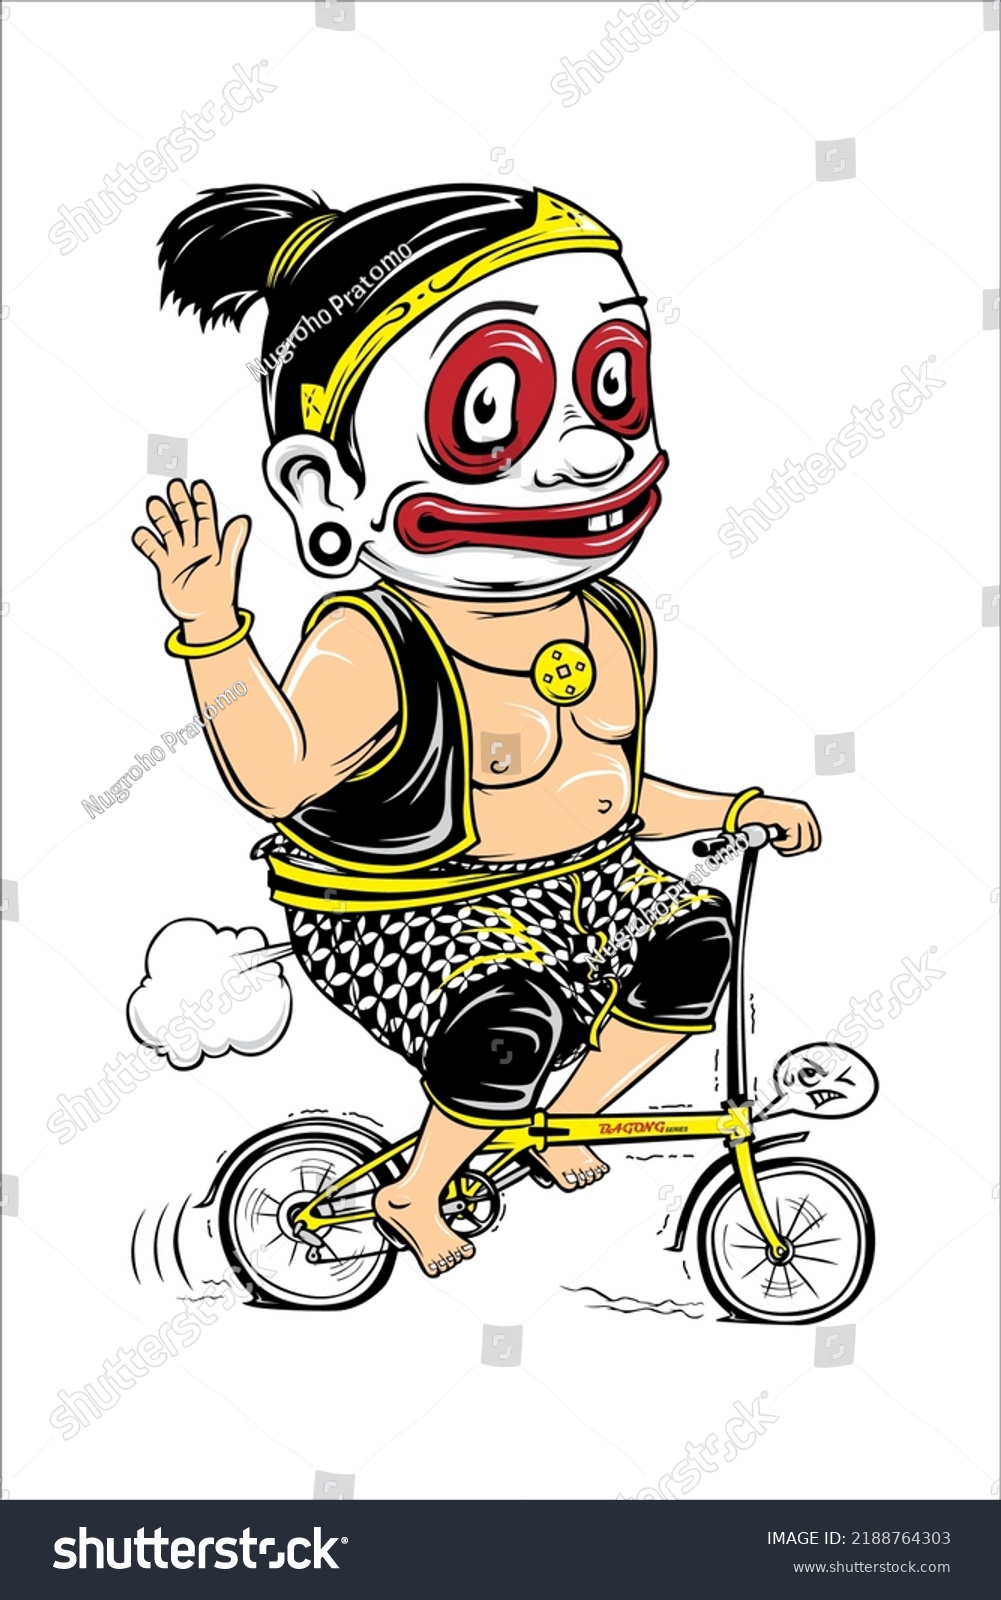 SVG of Illustration vector graphic cartoon of bagong wayang character riding a folding bike . He wears puppet clothes and is very happy, fun . Suitable for posters, banners, t-shirts, logo, icon, etc. svg